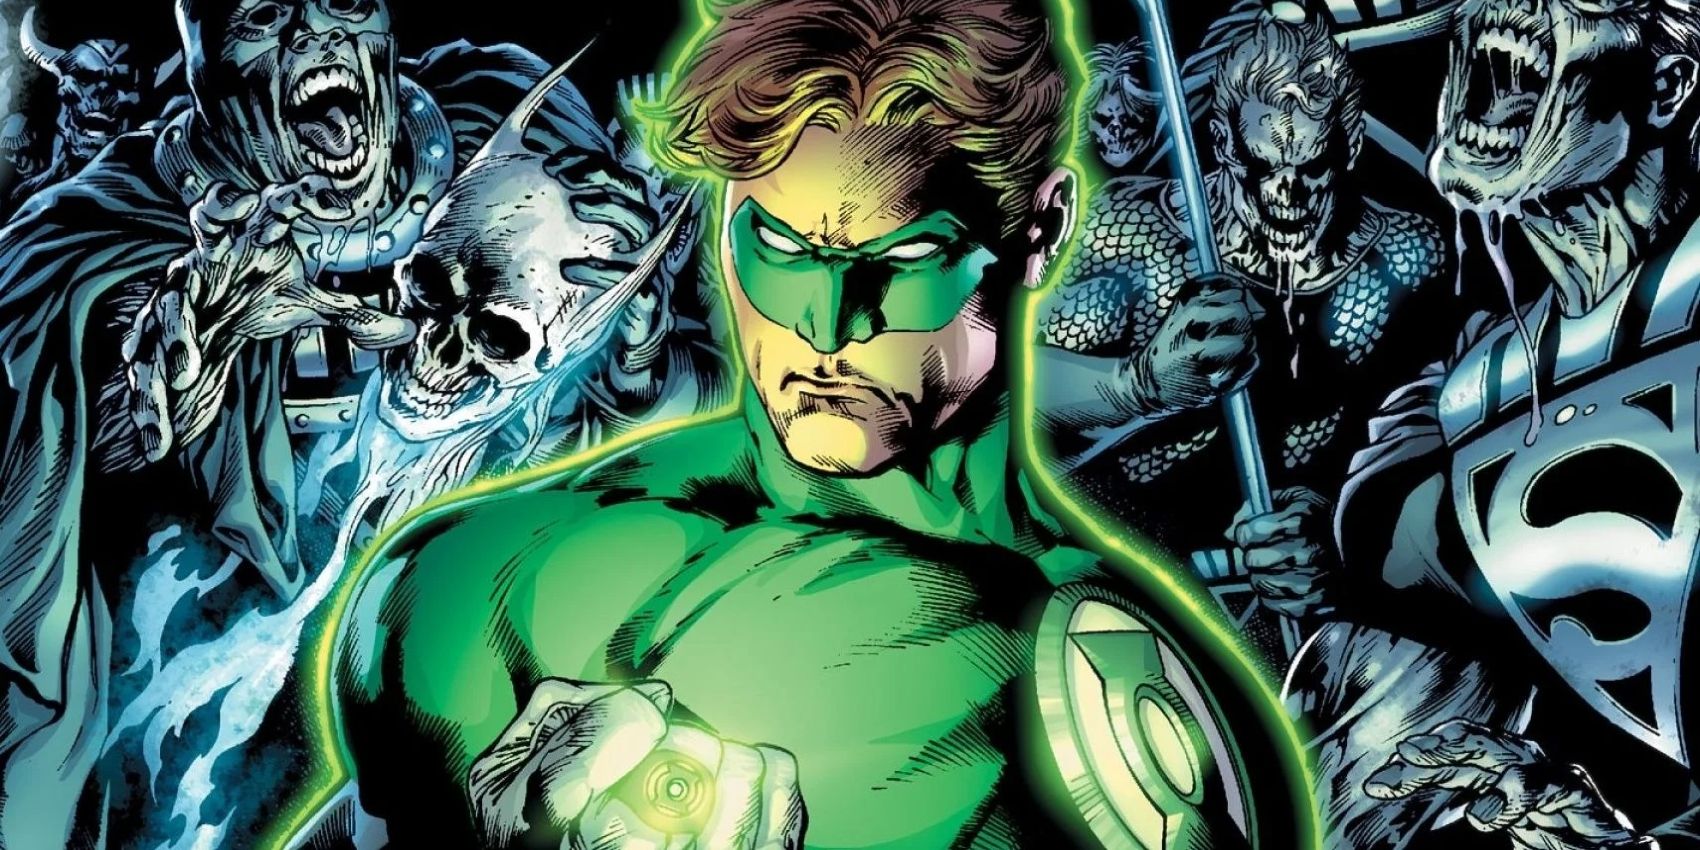 Green Lantern holds his ring as dark zombies gather behind him in Blackest Night.